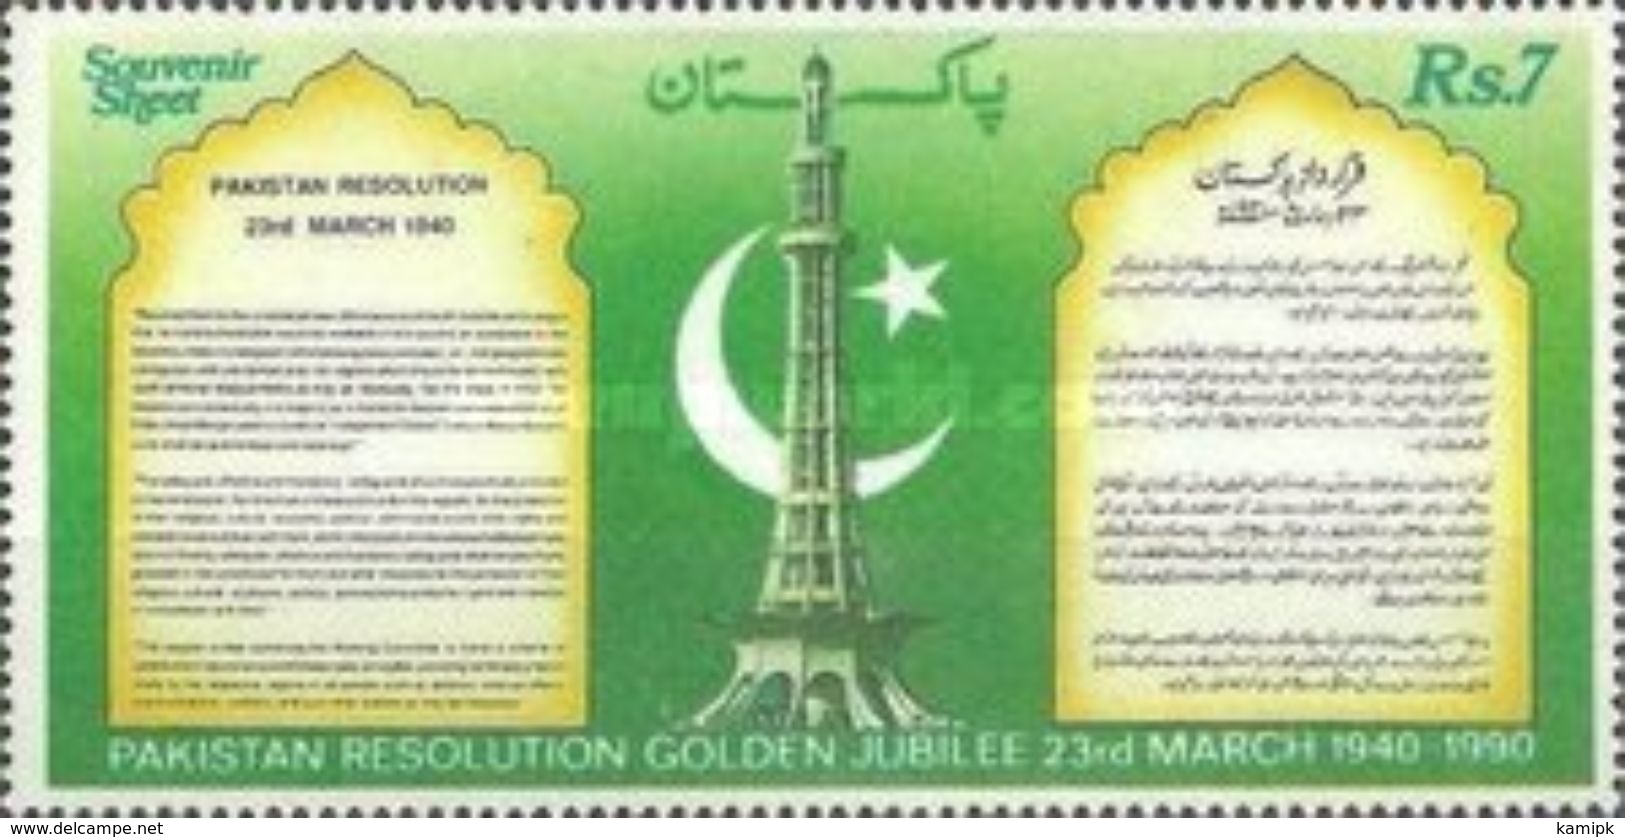 PAKISTAN MNH** STAMPS ,1990 The 50th Anniversary Of Passing Of Pakistan Resolution - Pakistan